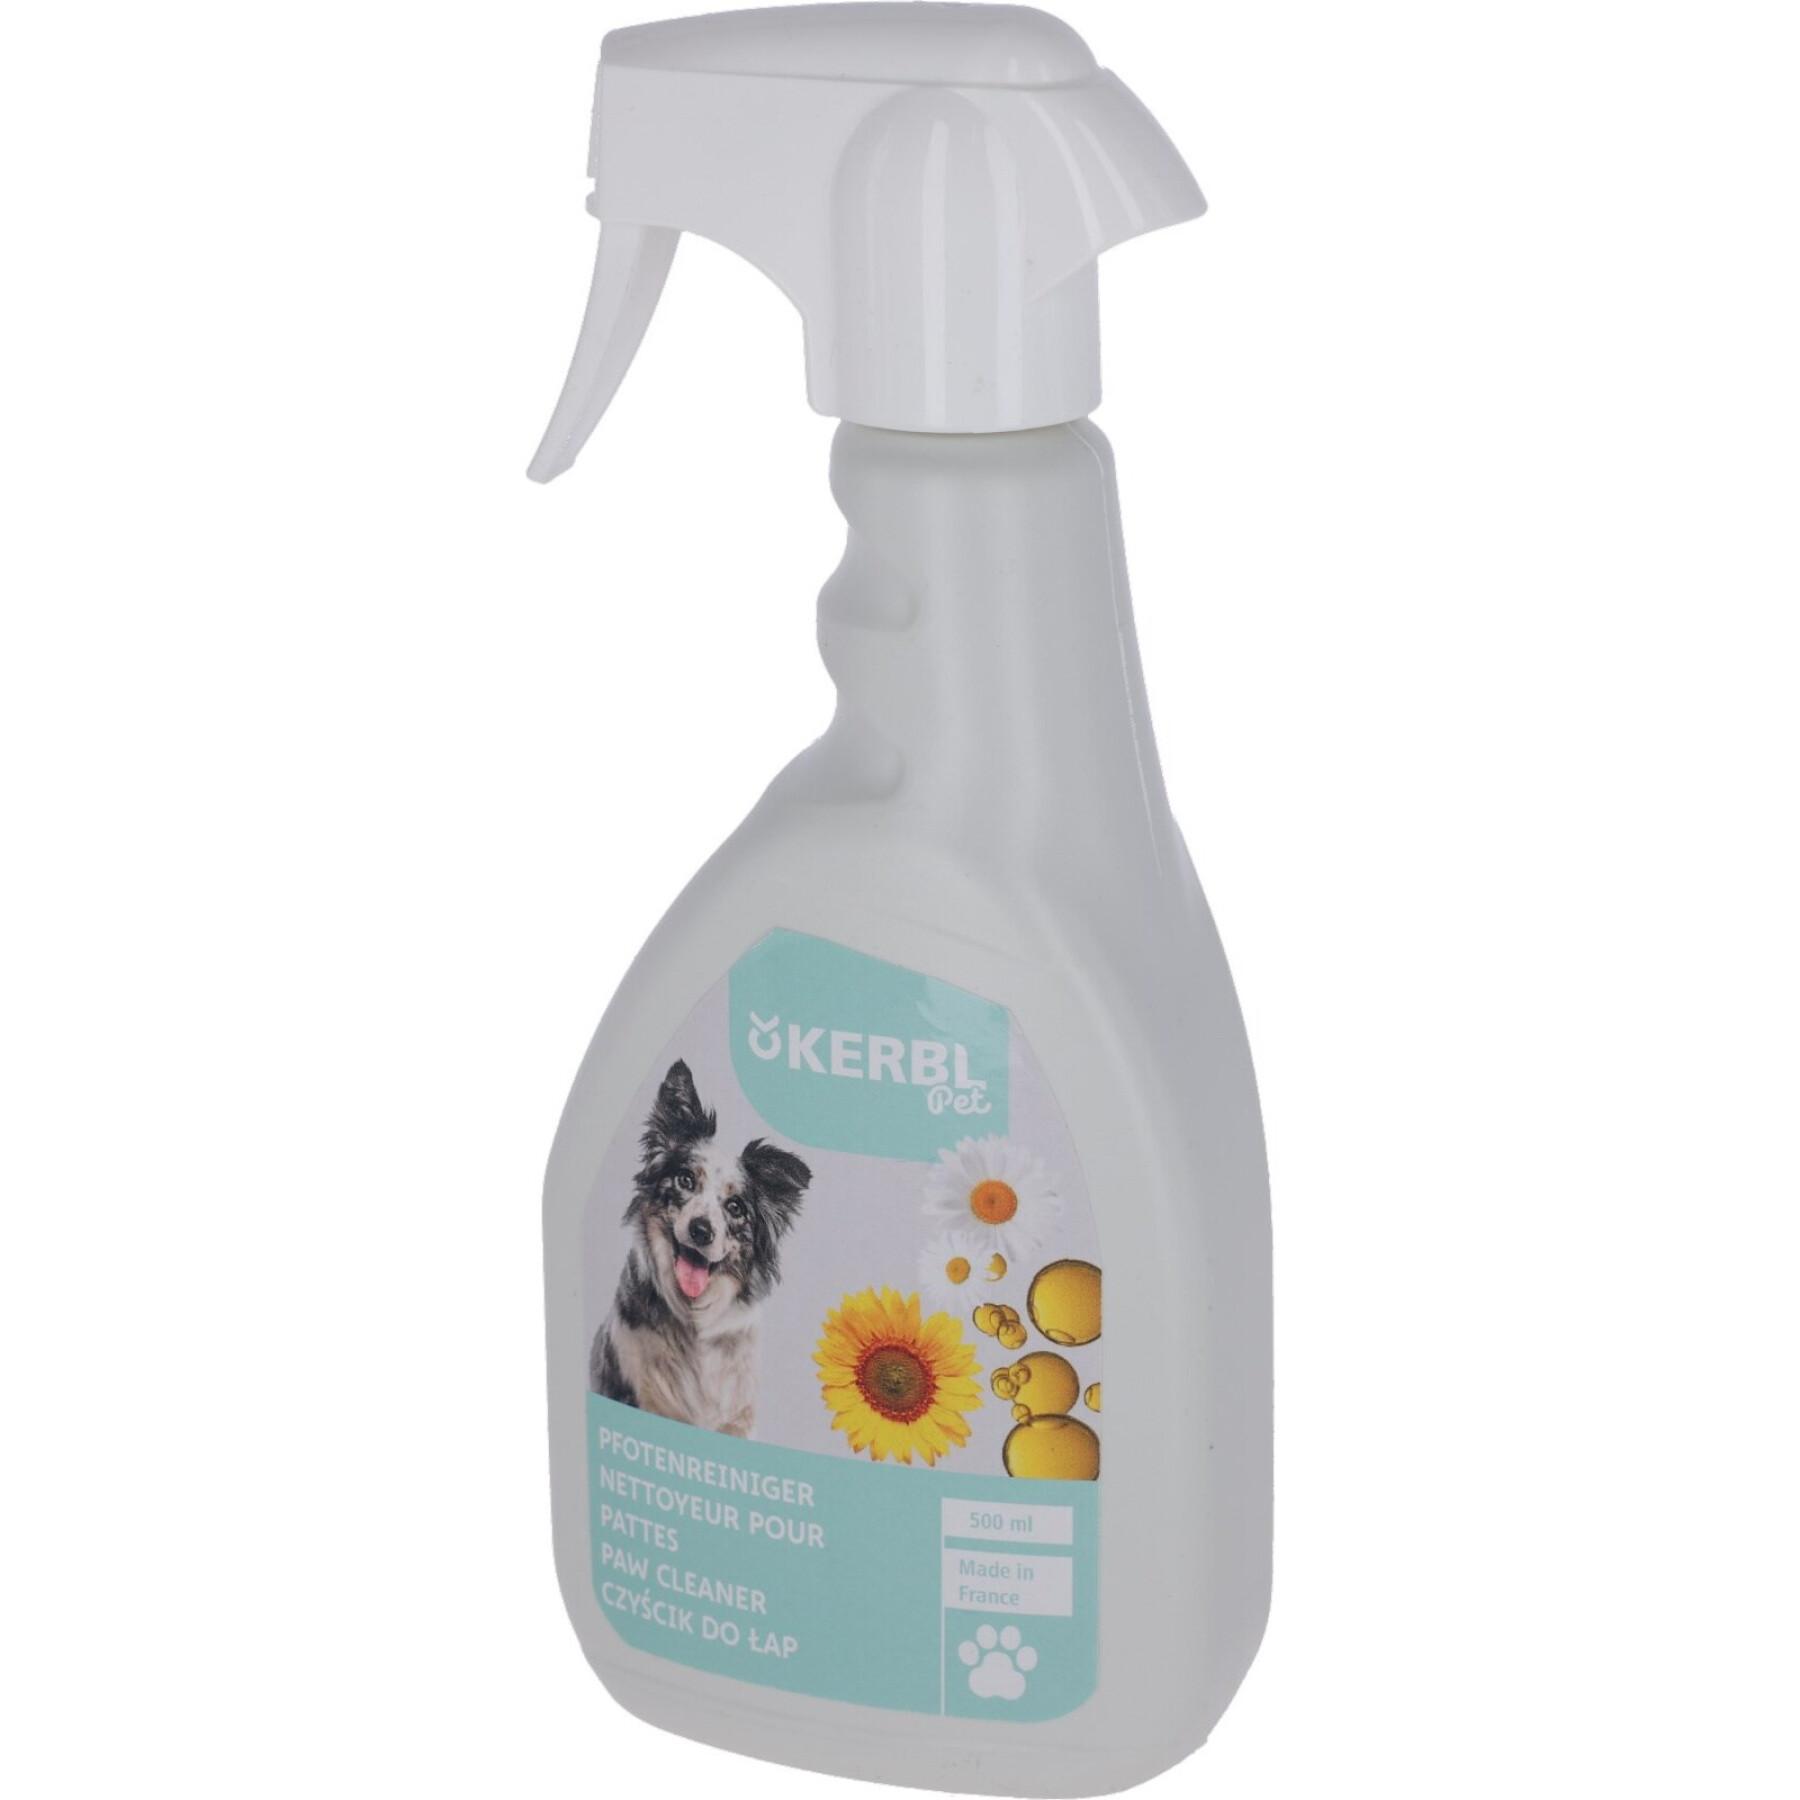 Paw cleaning spray Kerbl